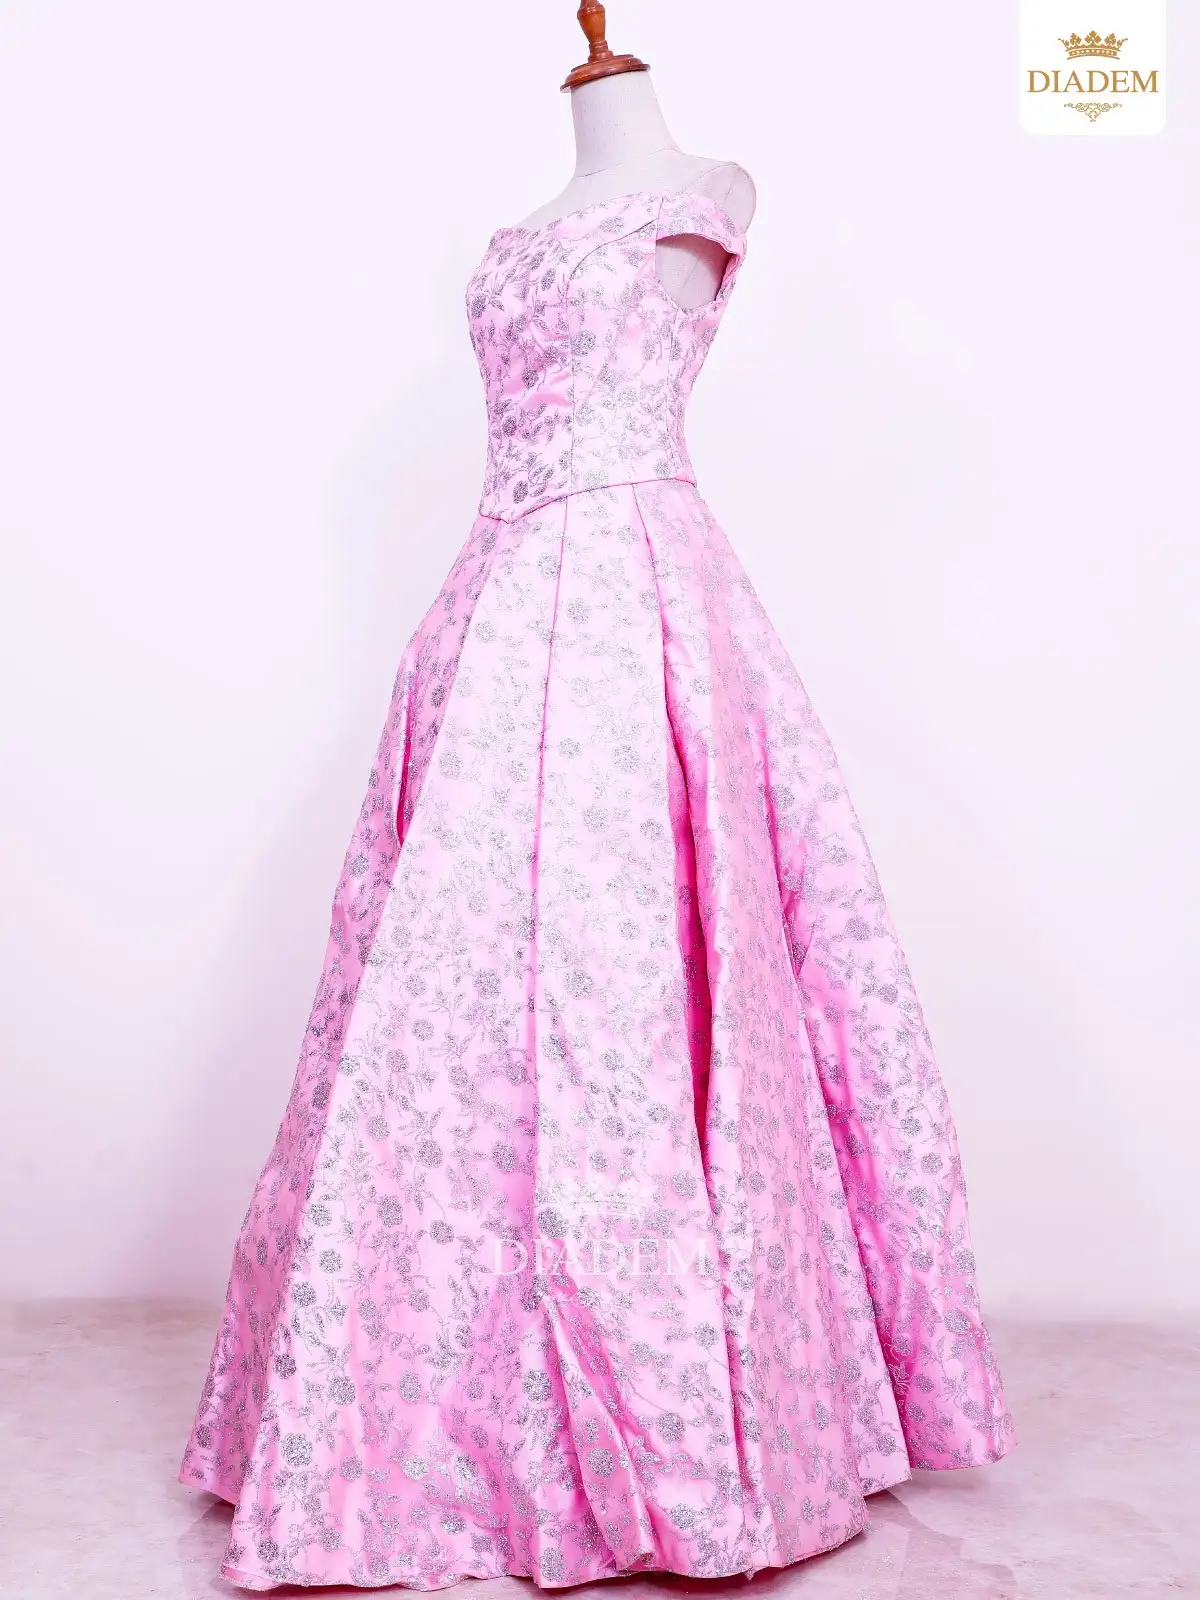 Valentine Pink Bridal Gown Embellished In Floral Design Stones And Beads